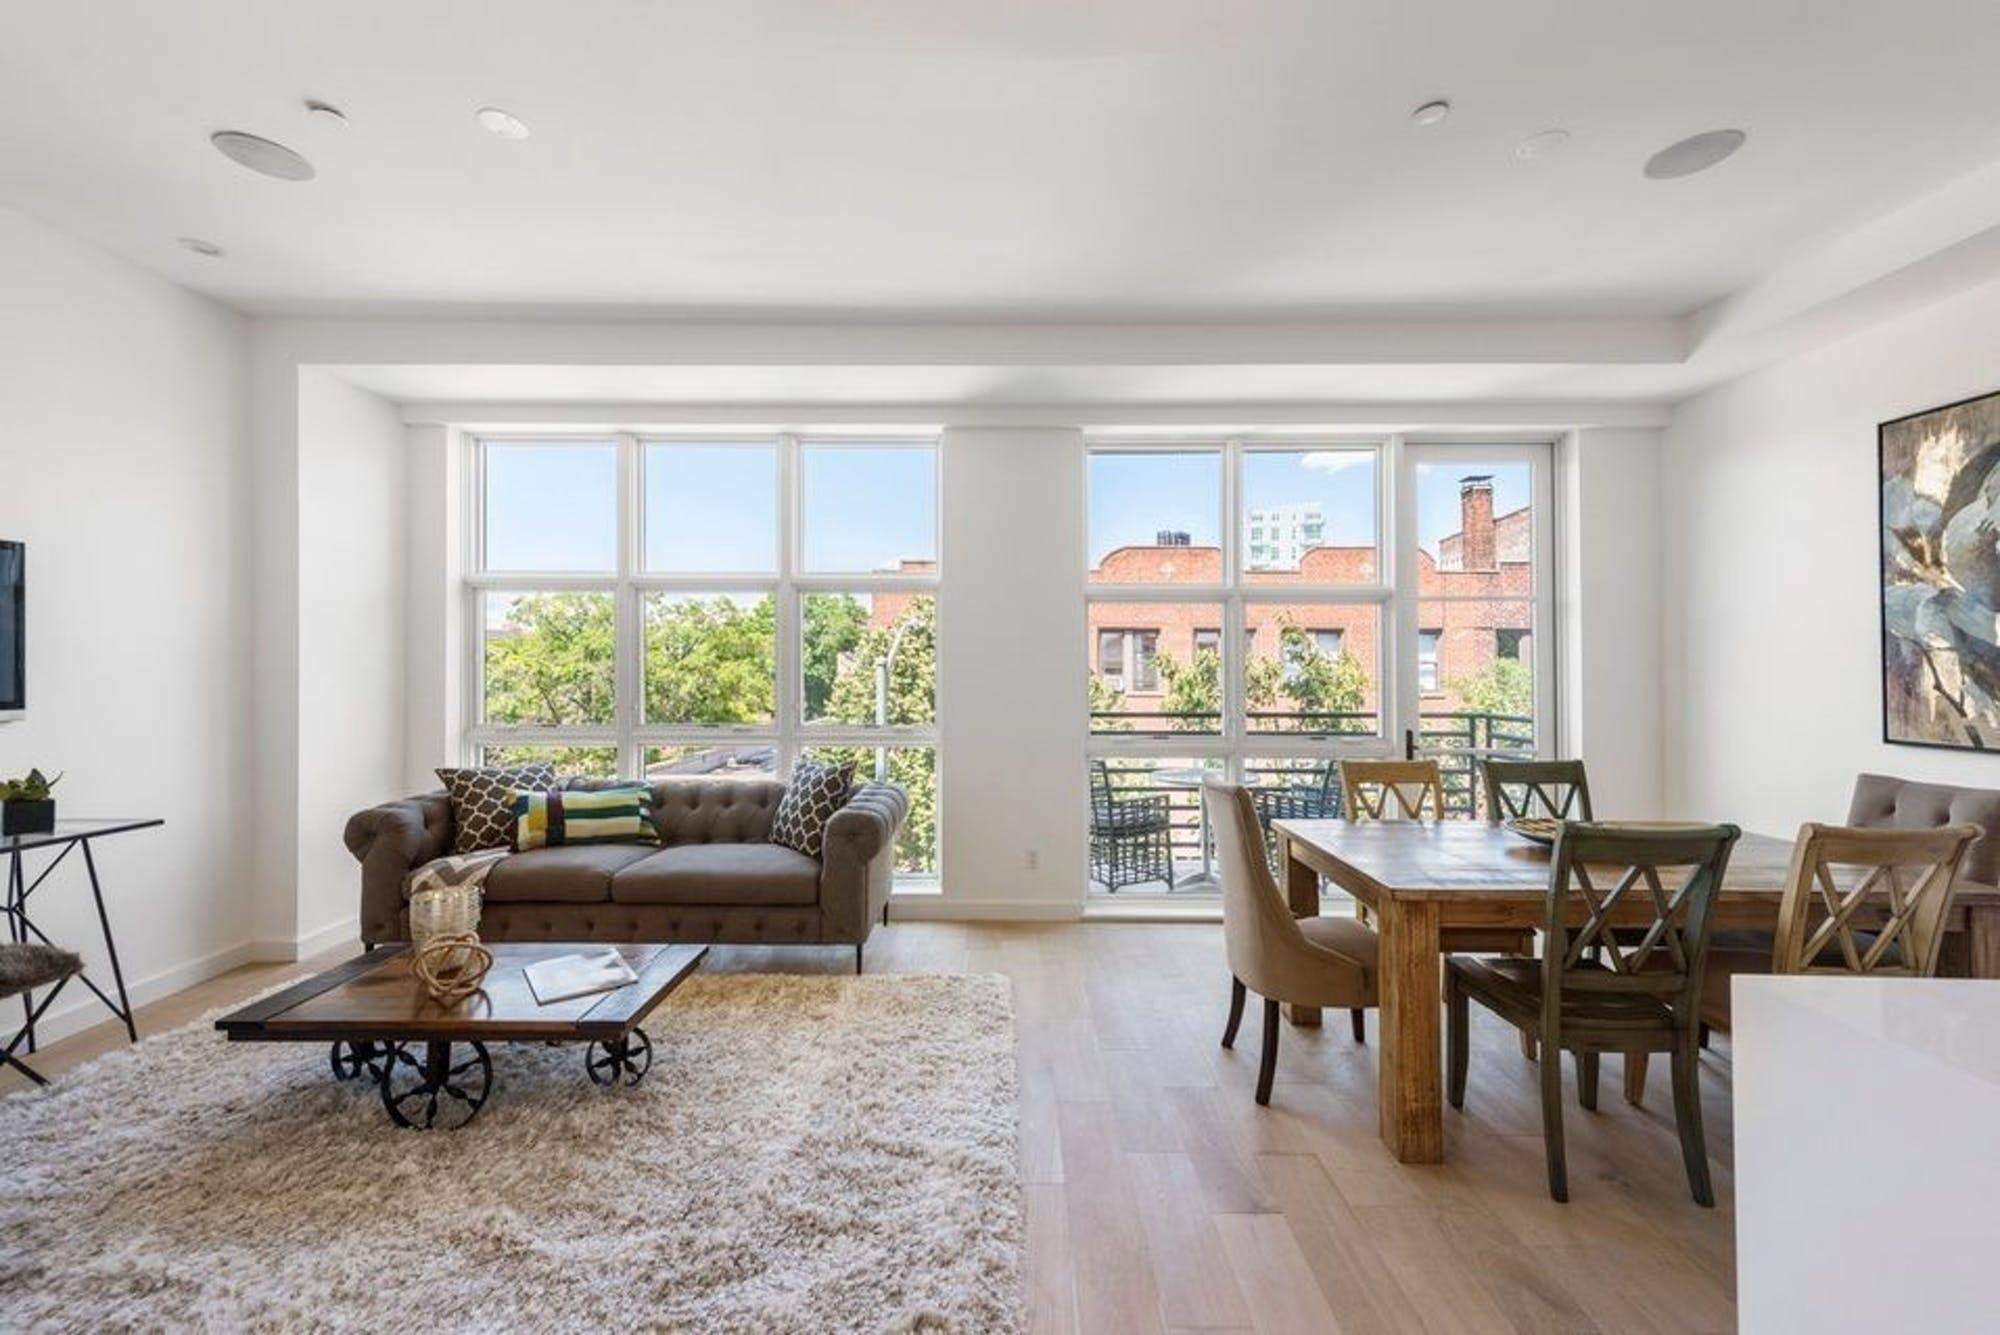 A luminous condo situated in the heart of Williamsburg, this 2 bedroom, 2 bathroom home blends a modern open plan layout with a collection of tasteful finishes.